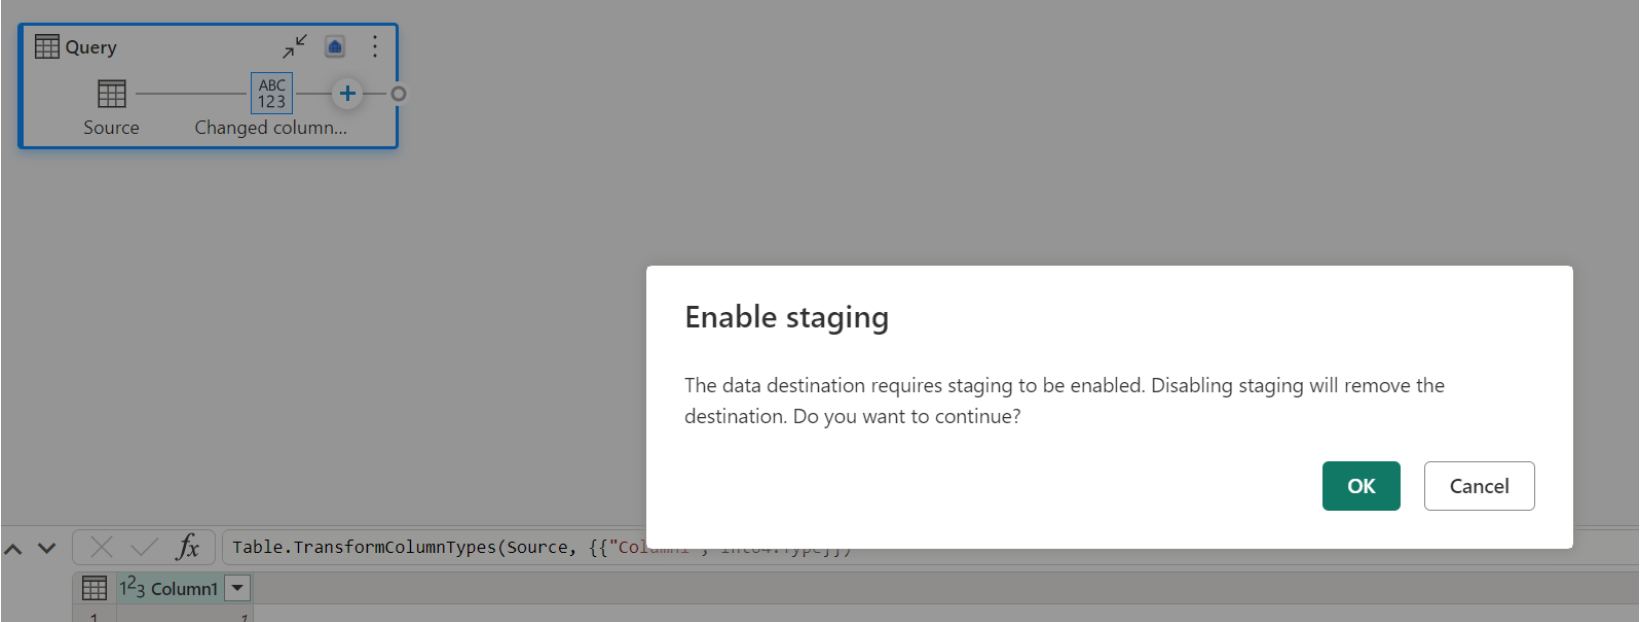 Screenshot of the Enable staging warning.